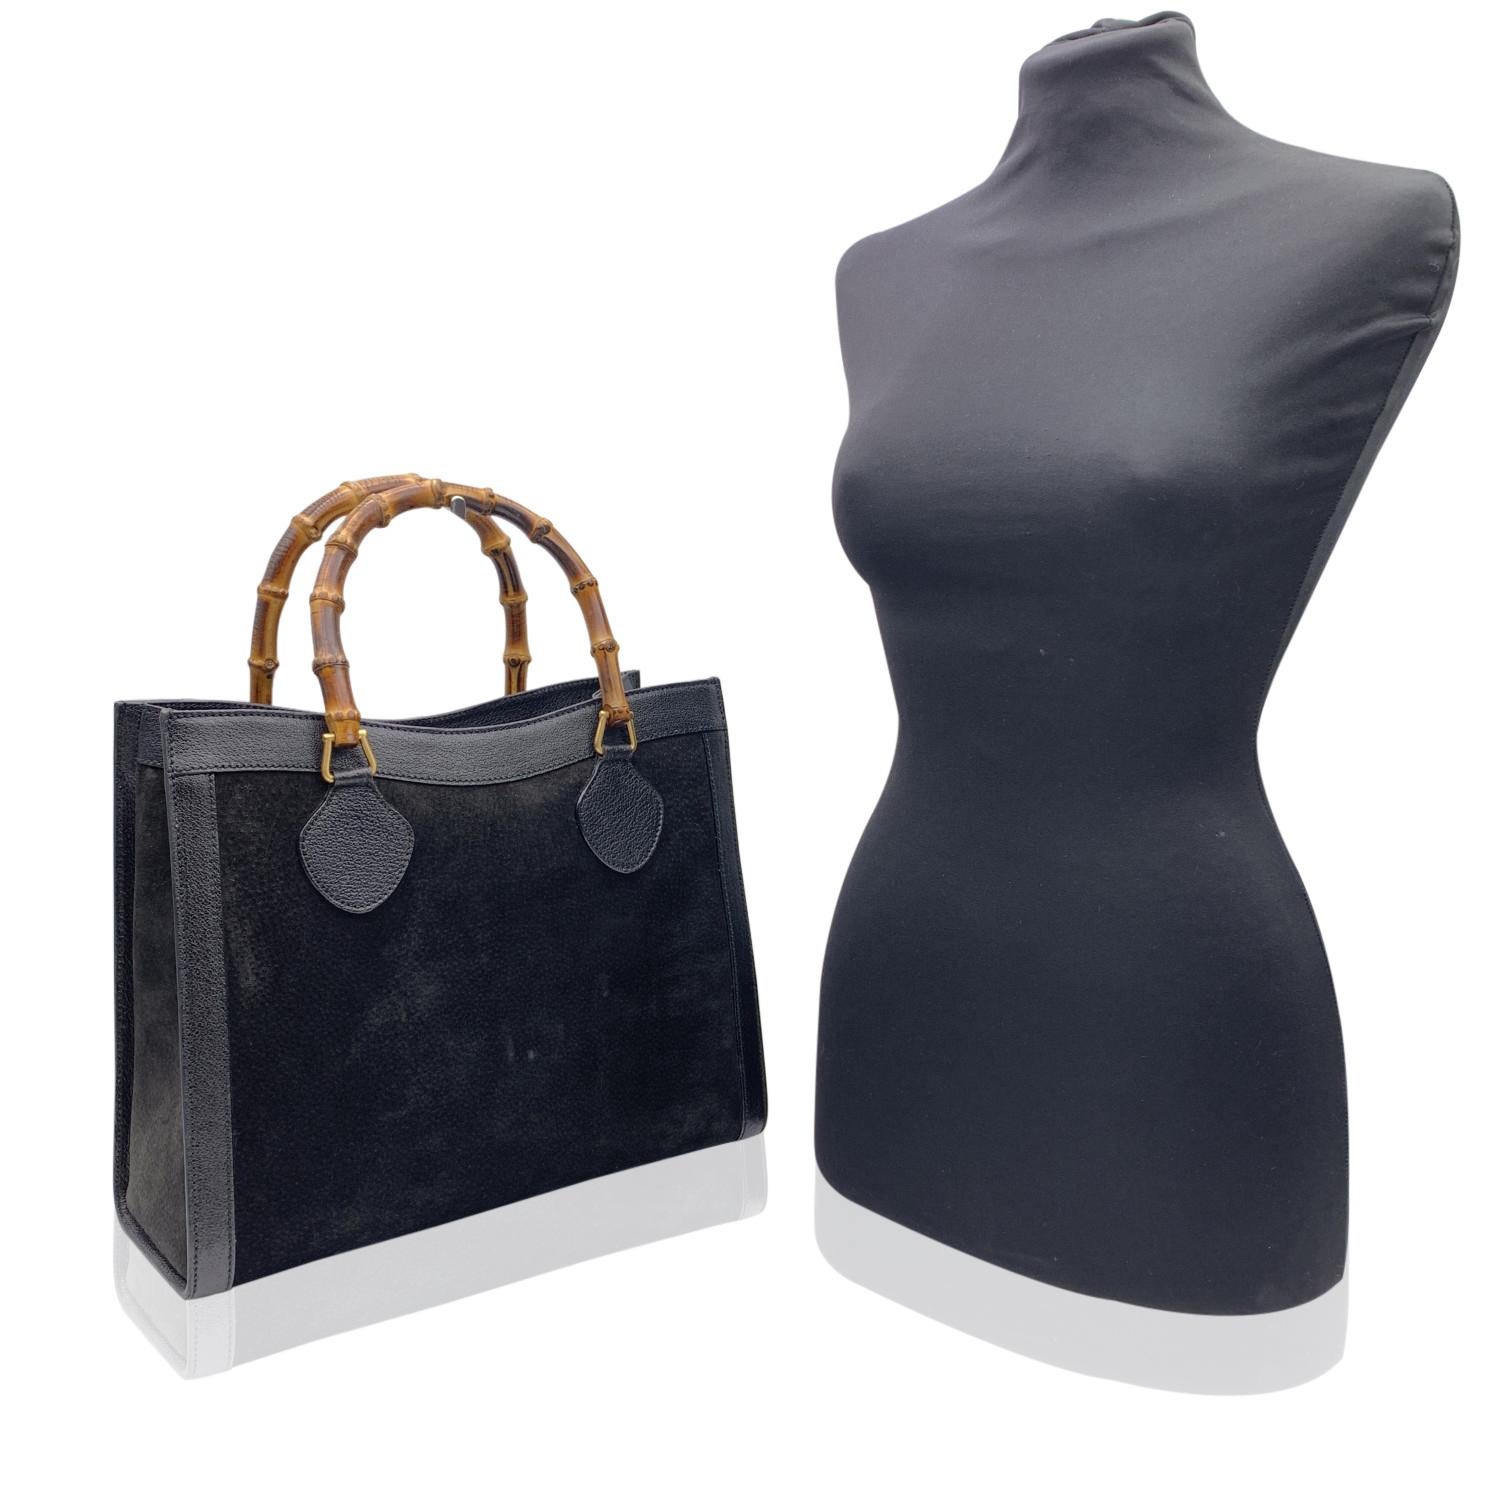 Beautiful Gucci Bamboo tote bag in black suede with genuine leather trim. Double distinctive Bamboo handle. Princess Diana, was snapped carrying a this model on several occasions. Magnetic button closure on top. 5 bottom feet. Gold metal hardware. 1